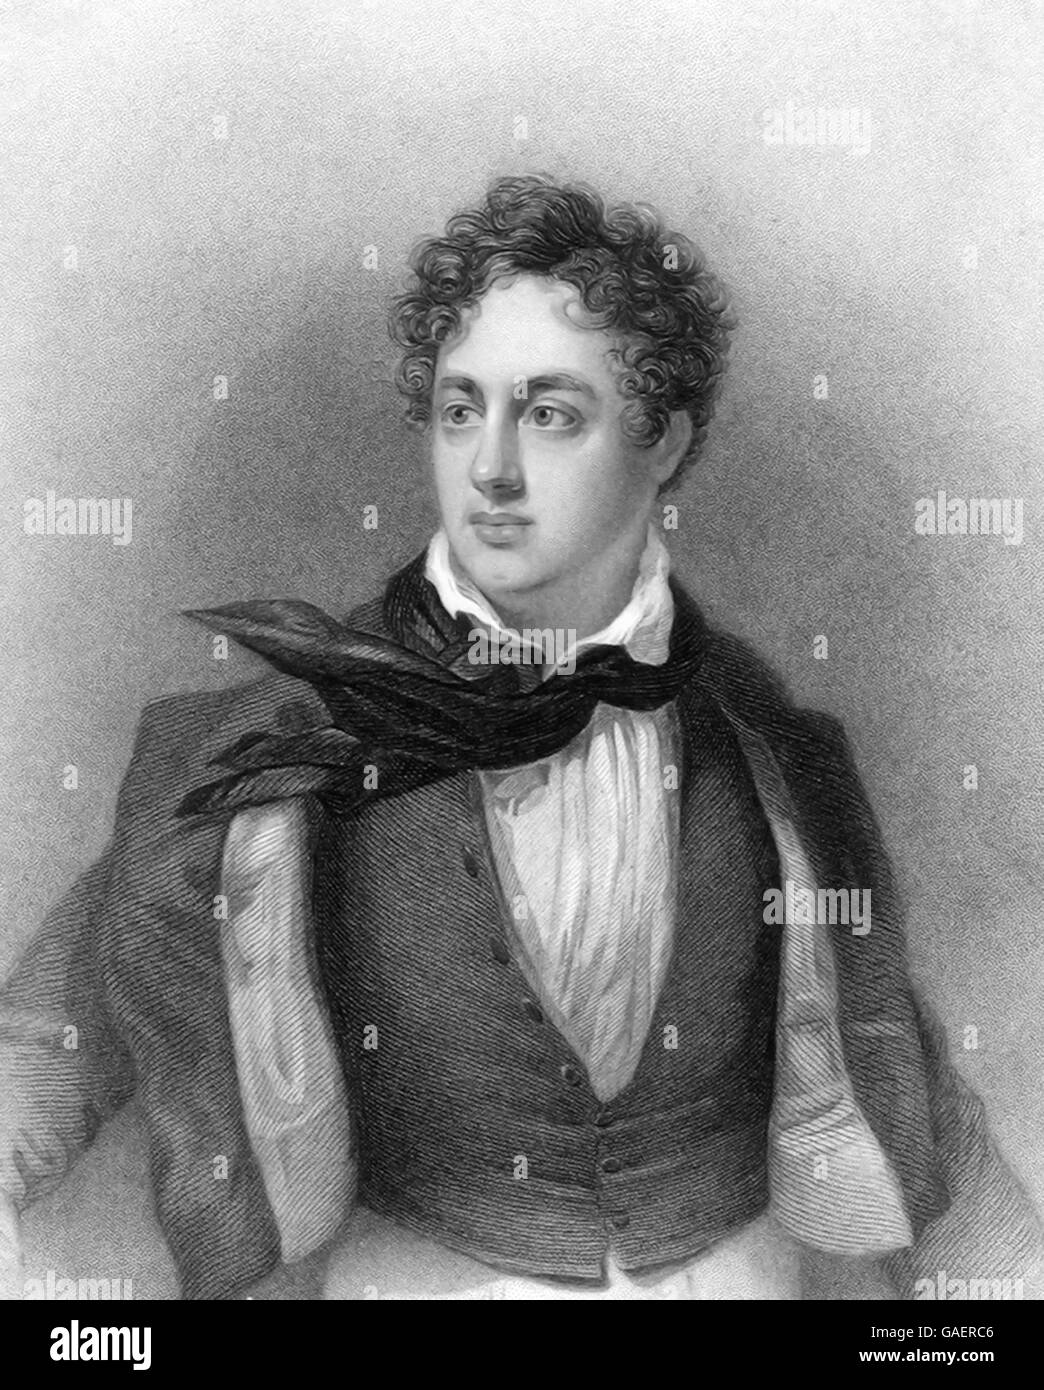 'Lord Byron at the age of 19', engraving by Edward Finden from a painting by George Sanders, published 1837. Stock Photo